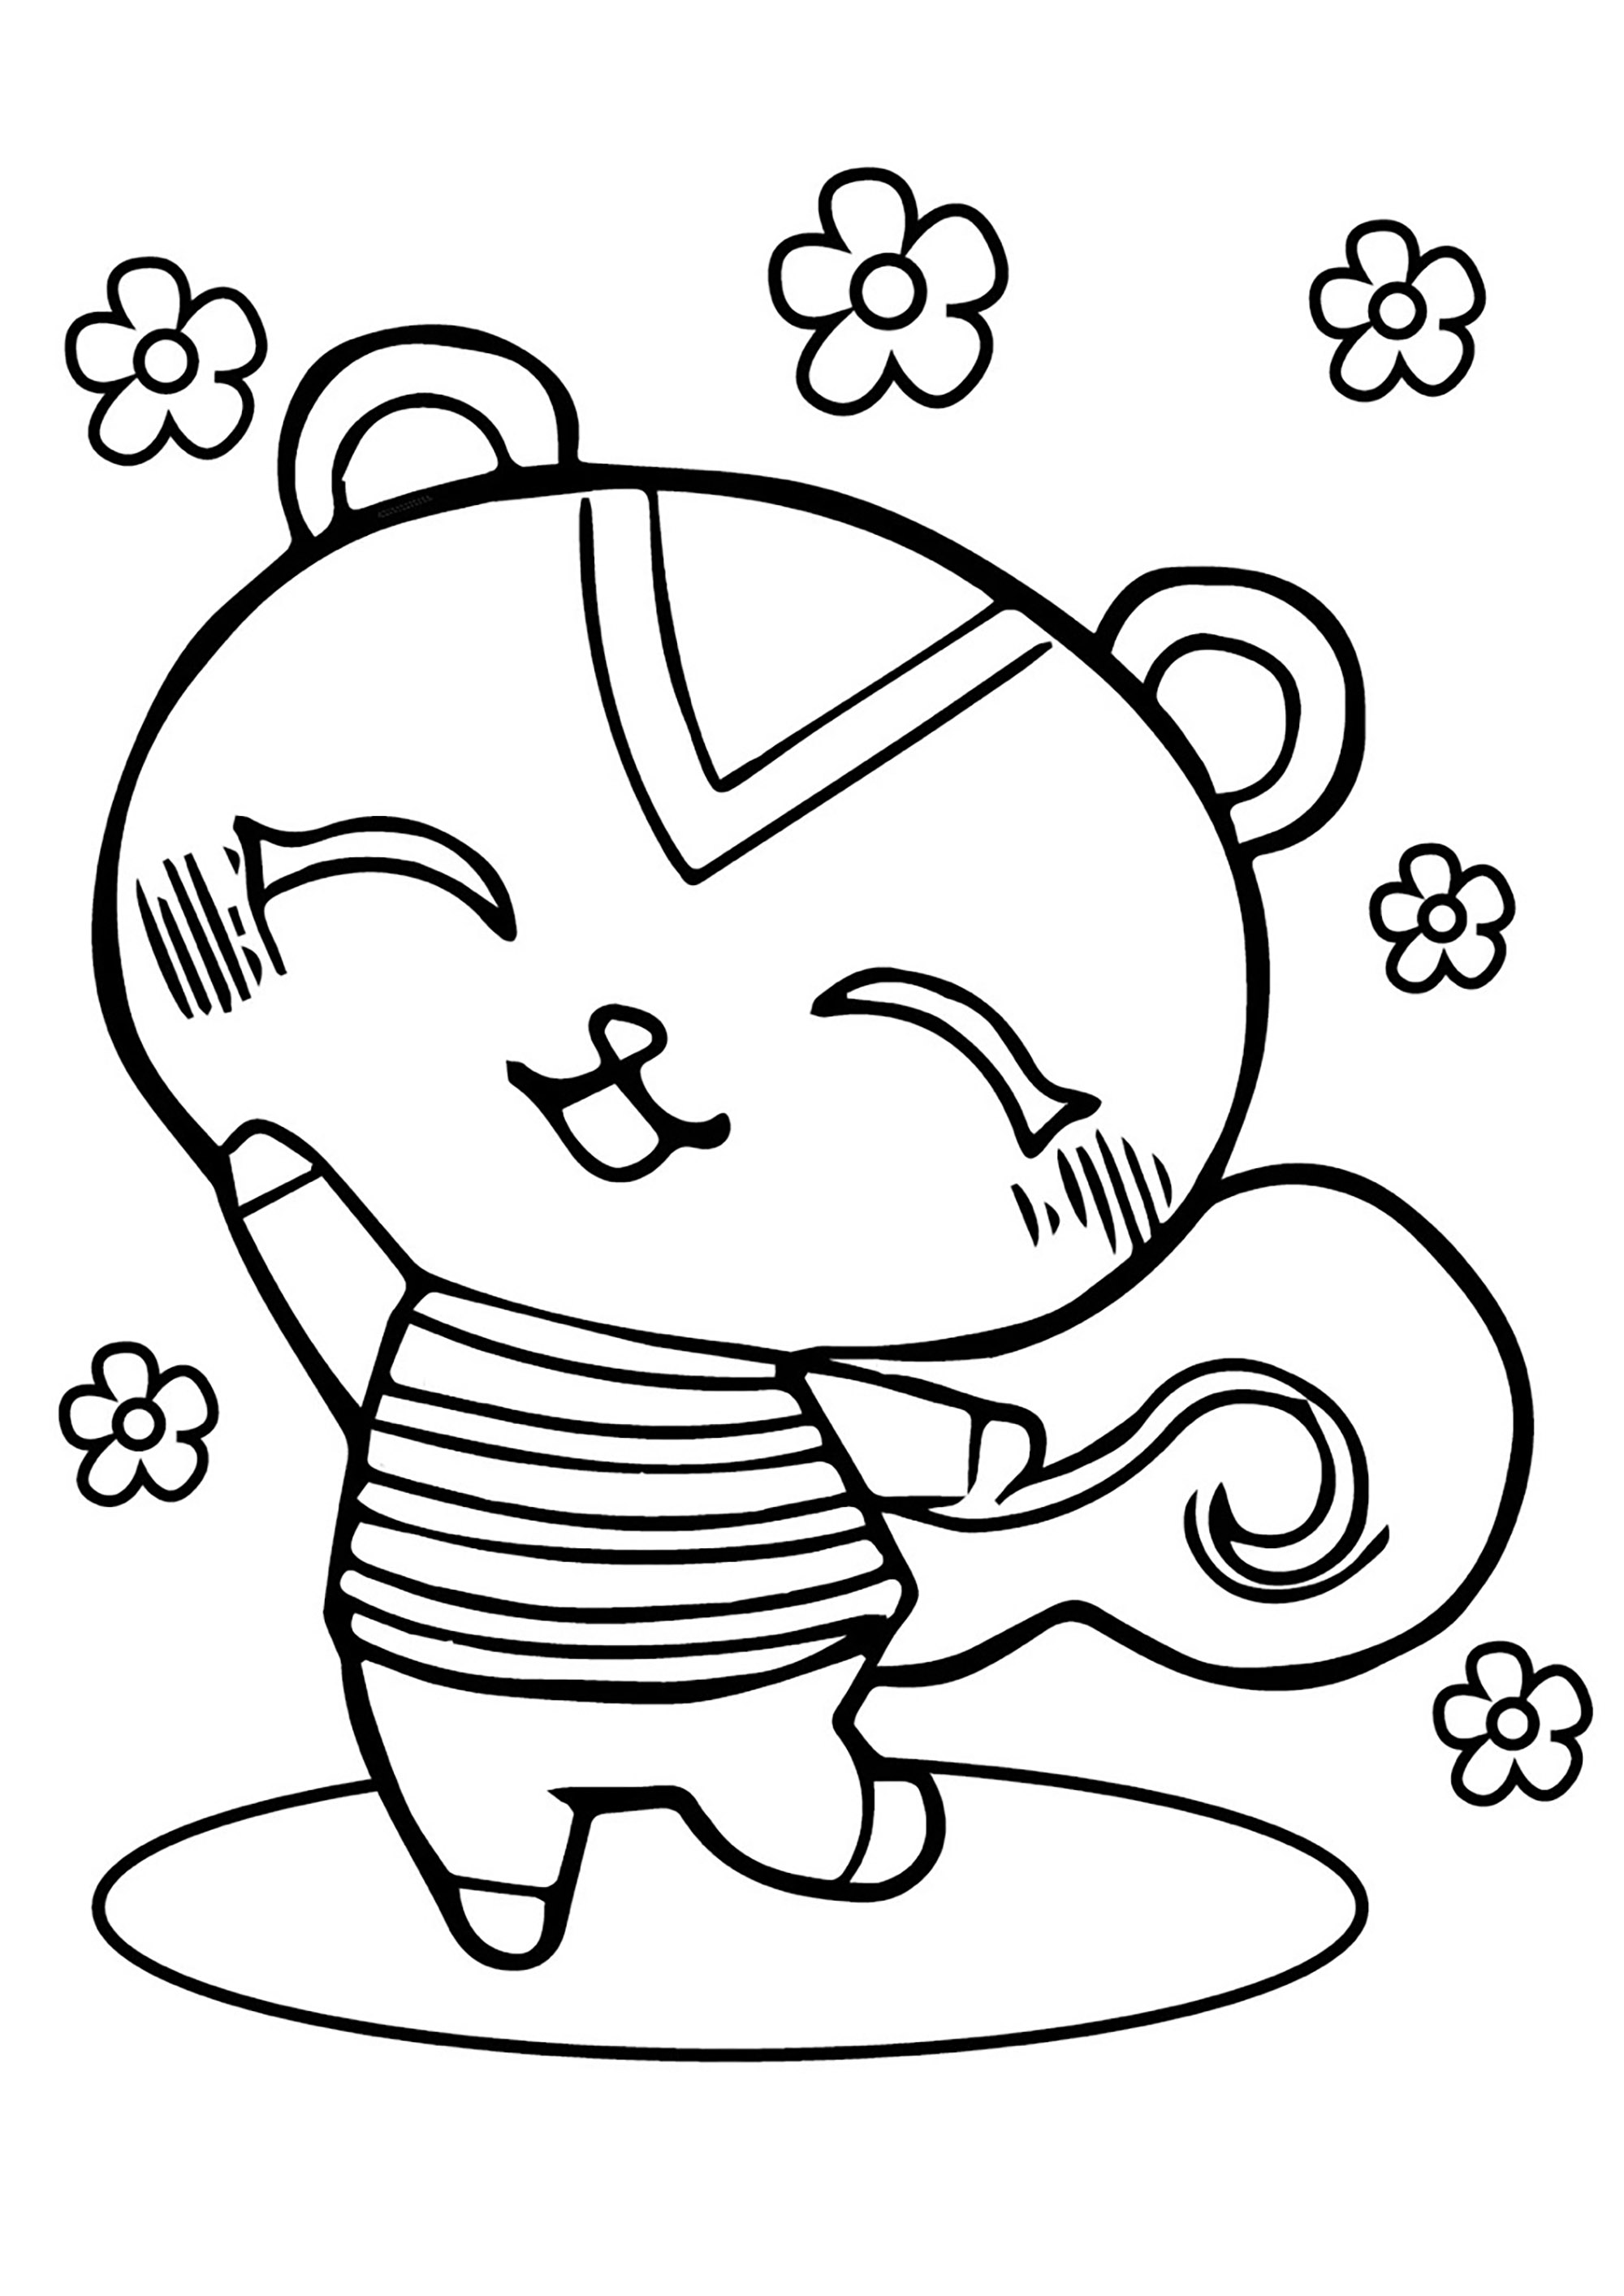 Simple Animal Crossing coloring page for children